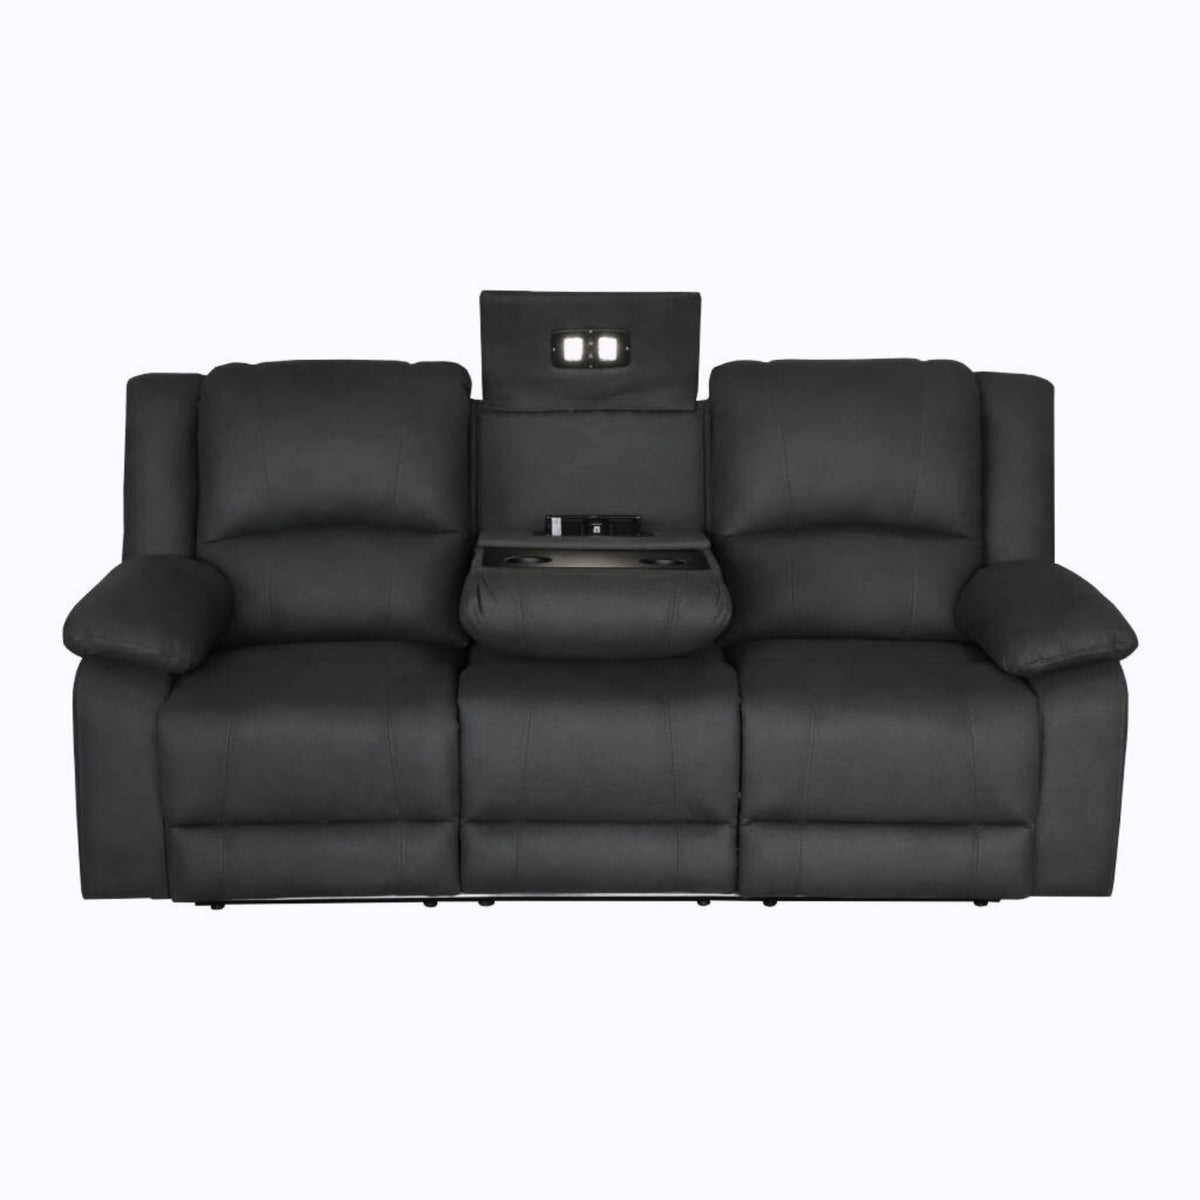 Anderson Fabric Electric Recliner Sofa Lounge Chair JET Dark Grey 1 + 2 + 3 Seater